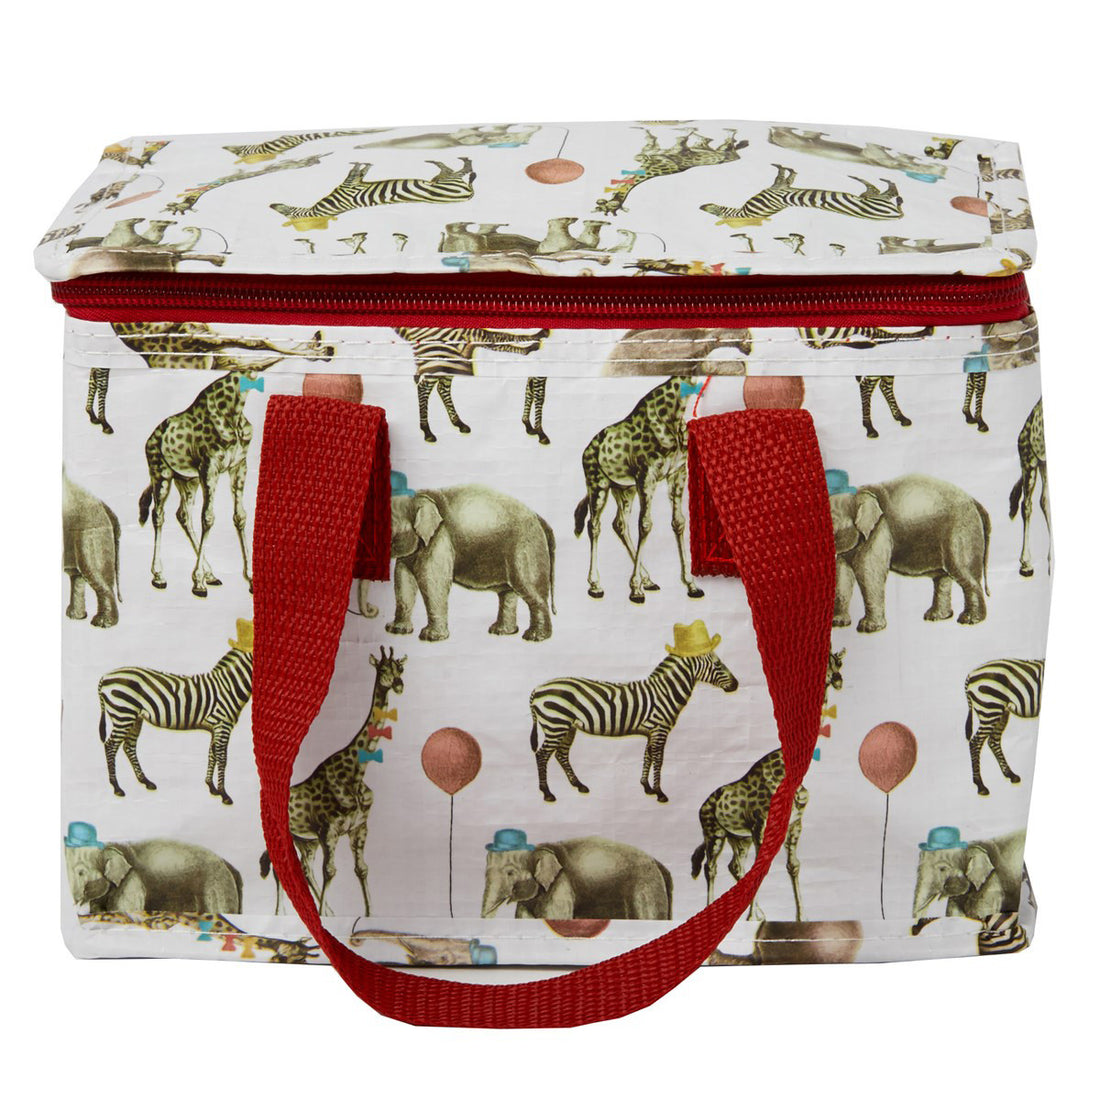 rjb-stone-party-animals-lunch-bag- (1)